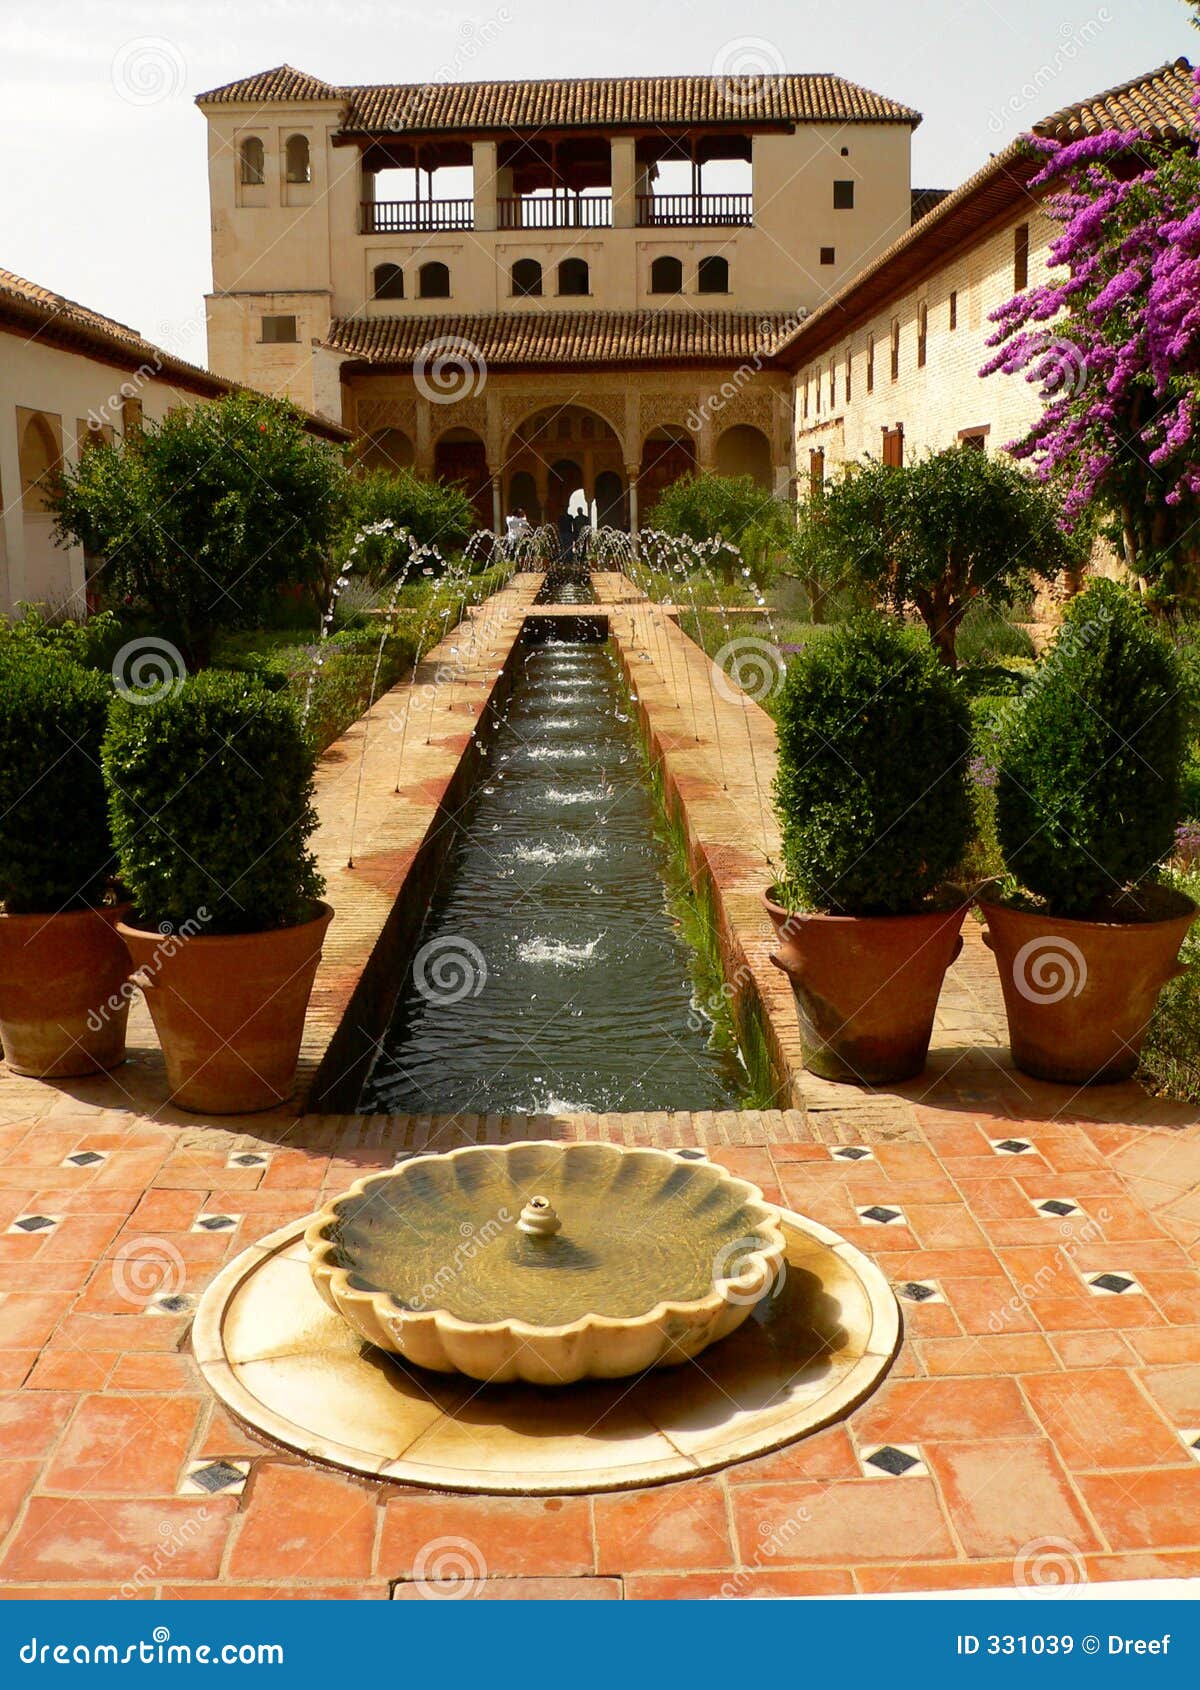 Alhambra Palace Architecture | Design & Highlights